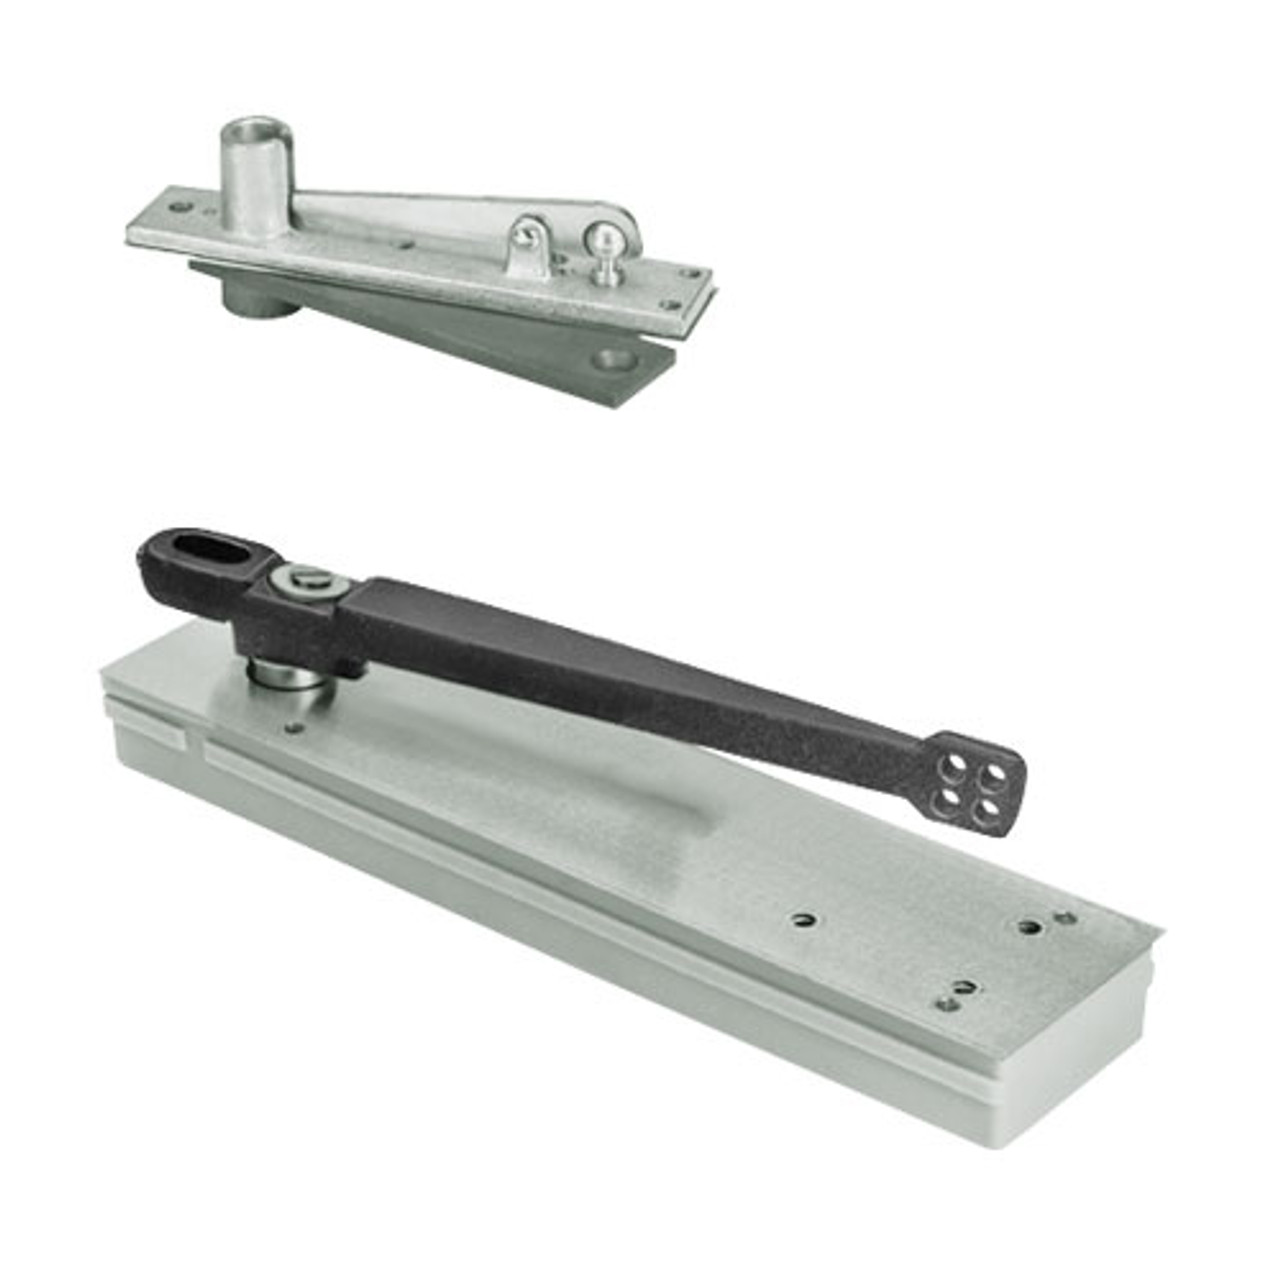 5013ABC90-RH-618 Rixson 50 Series Single Acting Center Hung Shallow Depth Floor Closers in Bright Nickel Finish